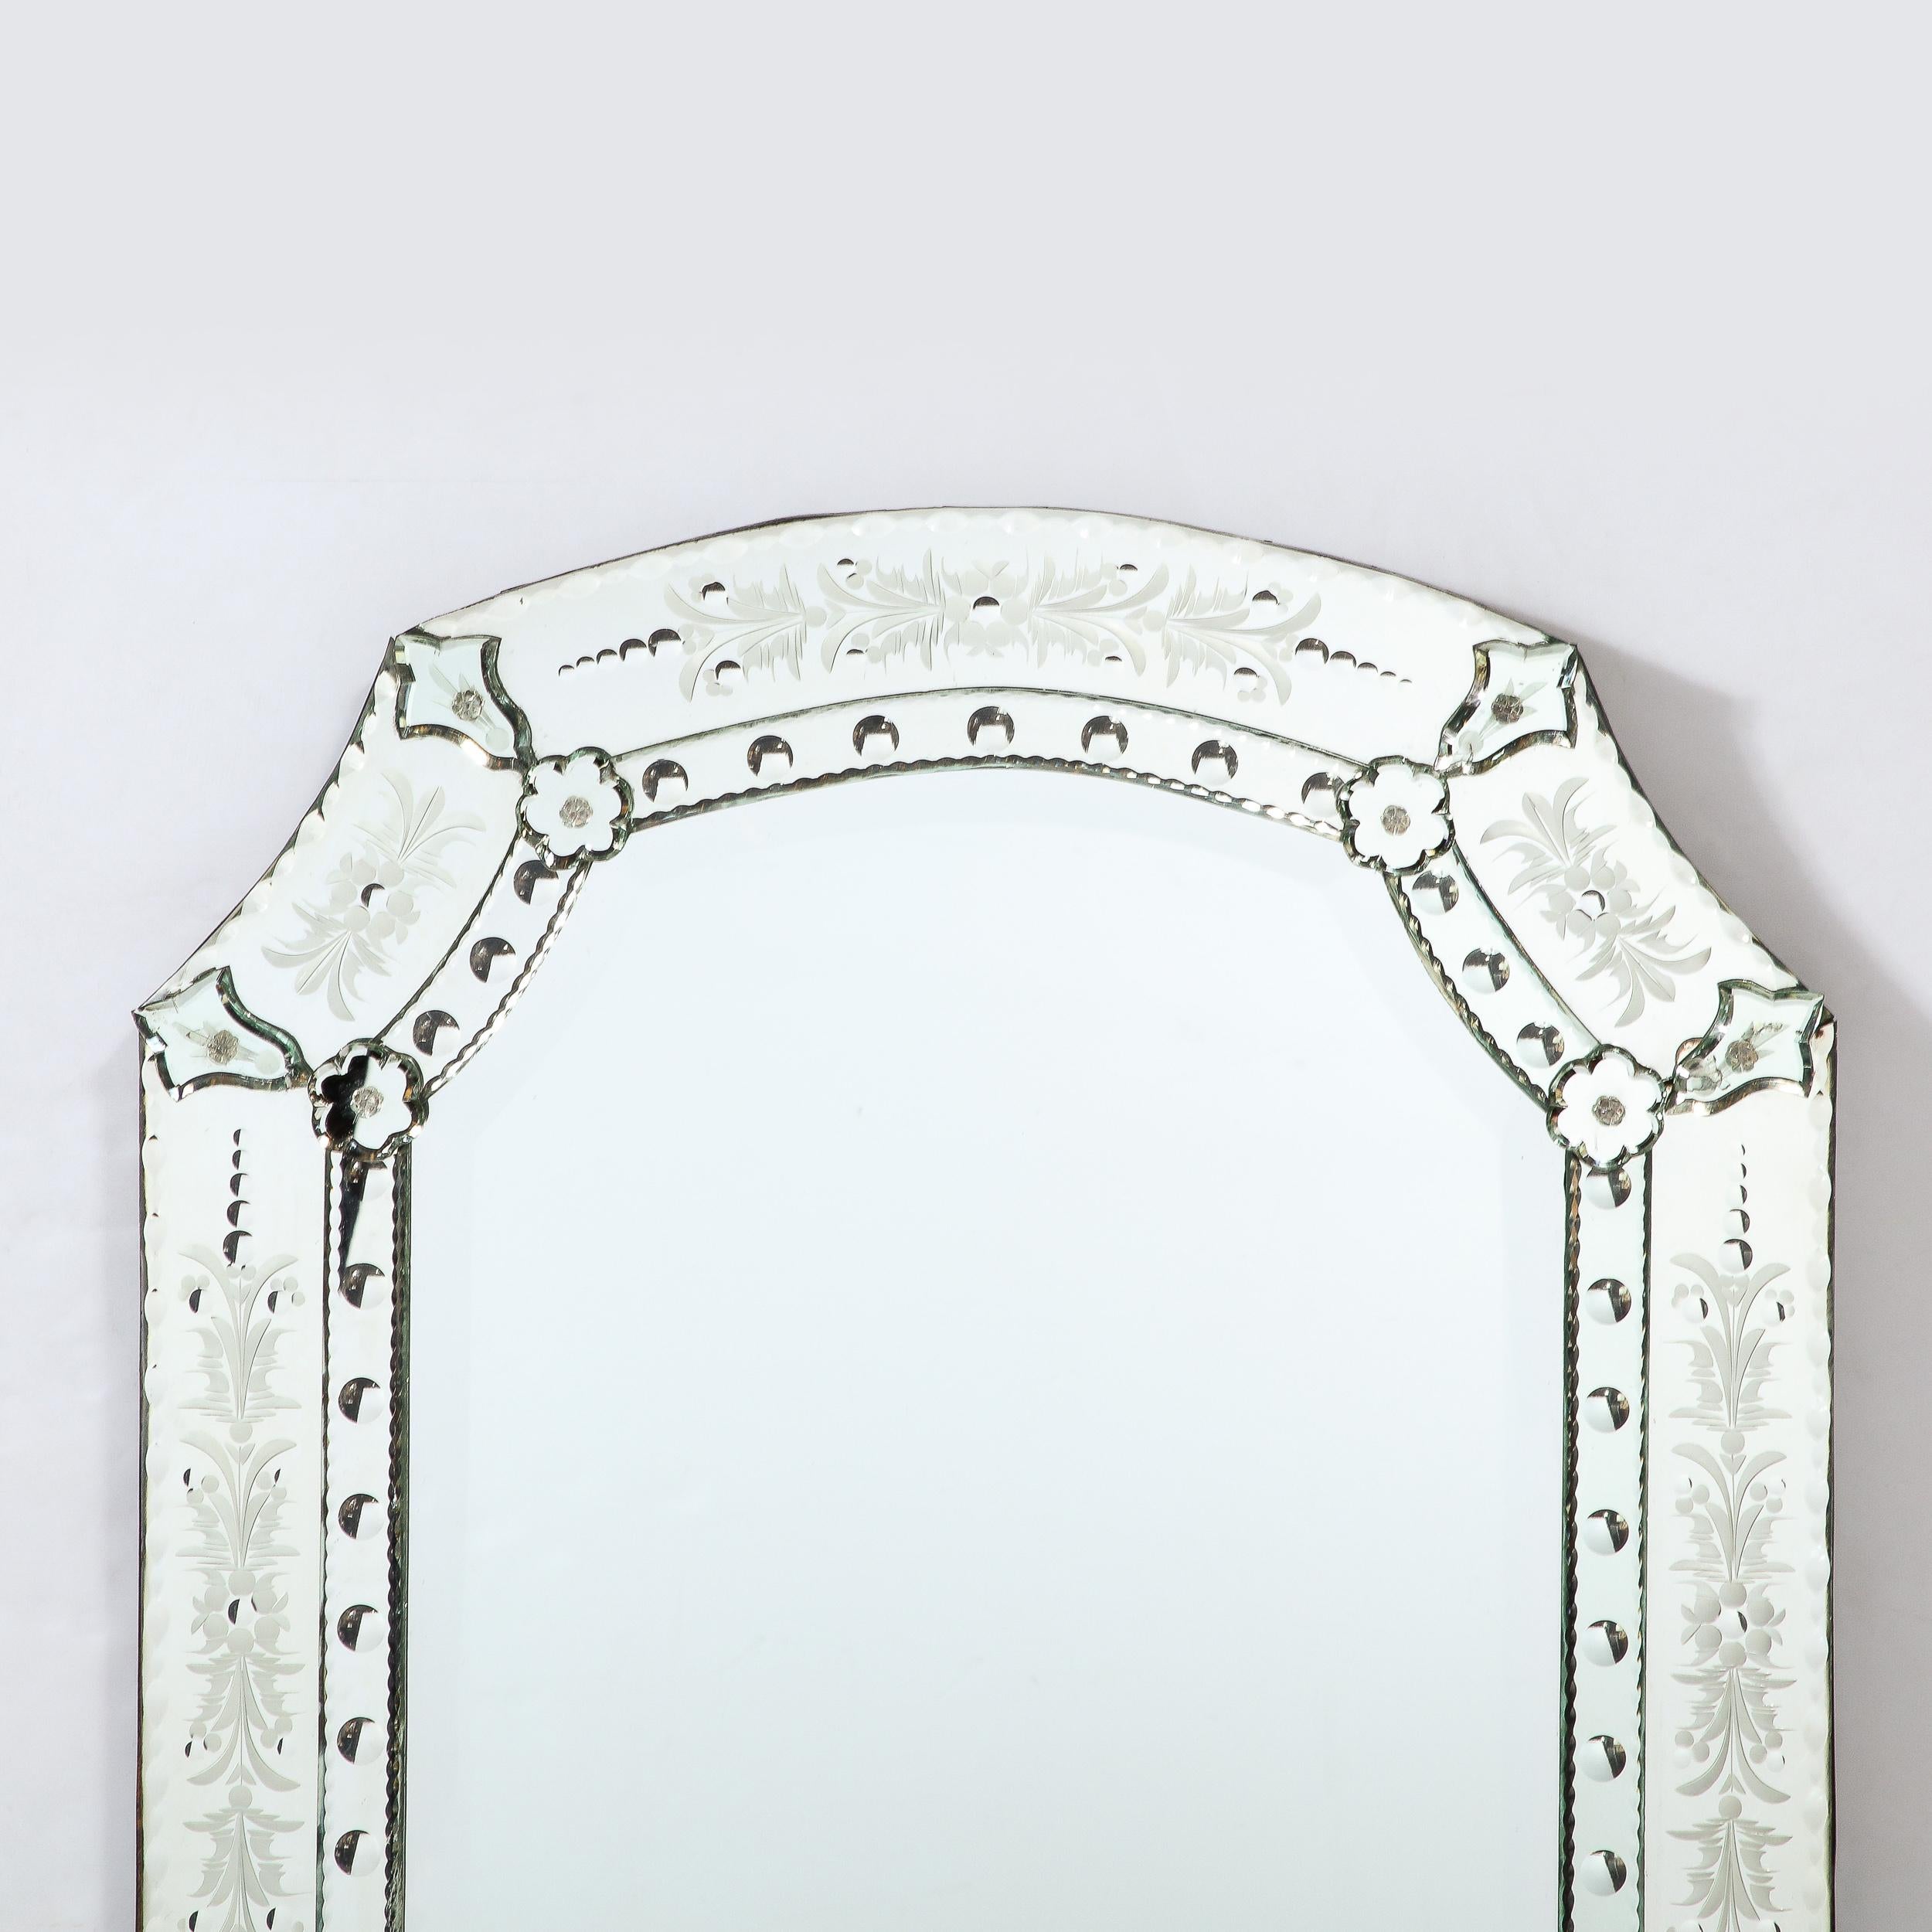 This beautiful Mid-Century Modern Venetian glass mirror was executed in Italy, circa 1960. It features a rectangular body with an arch form top- consisting of two curved panels on its neck and a demilune panel crowning the form. The mirrored